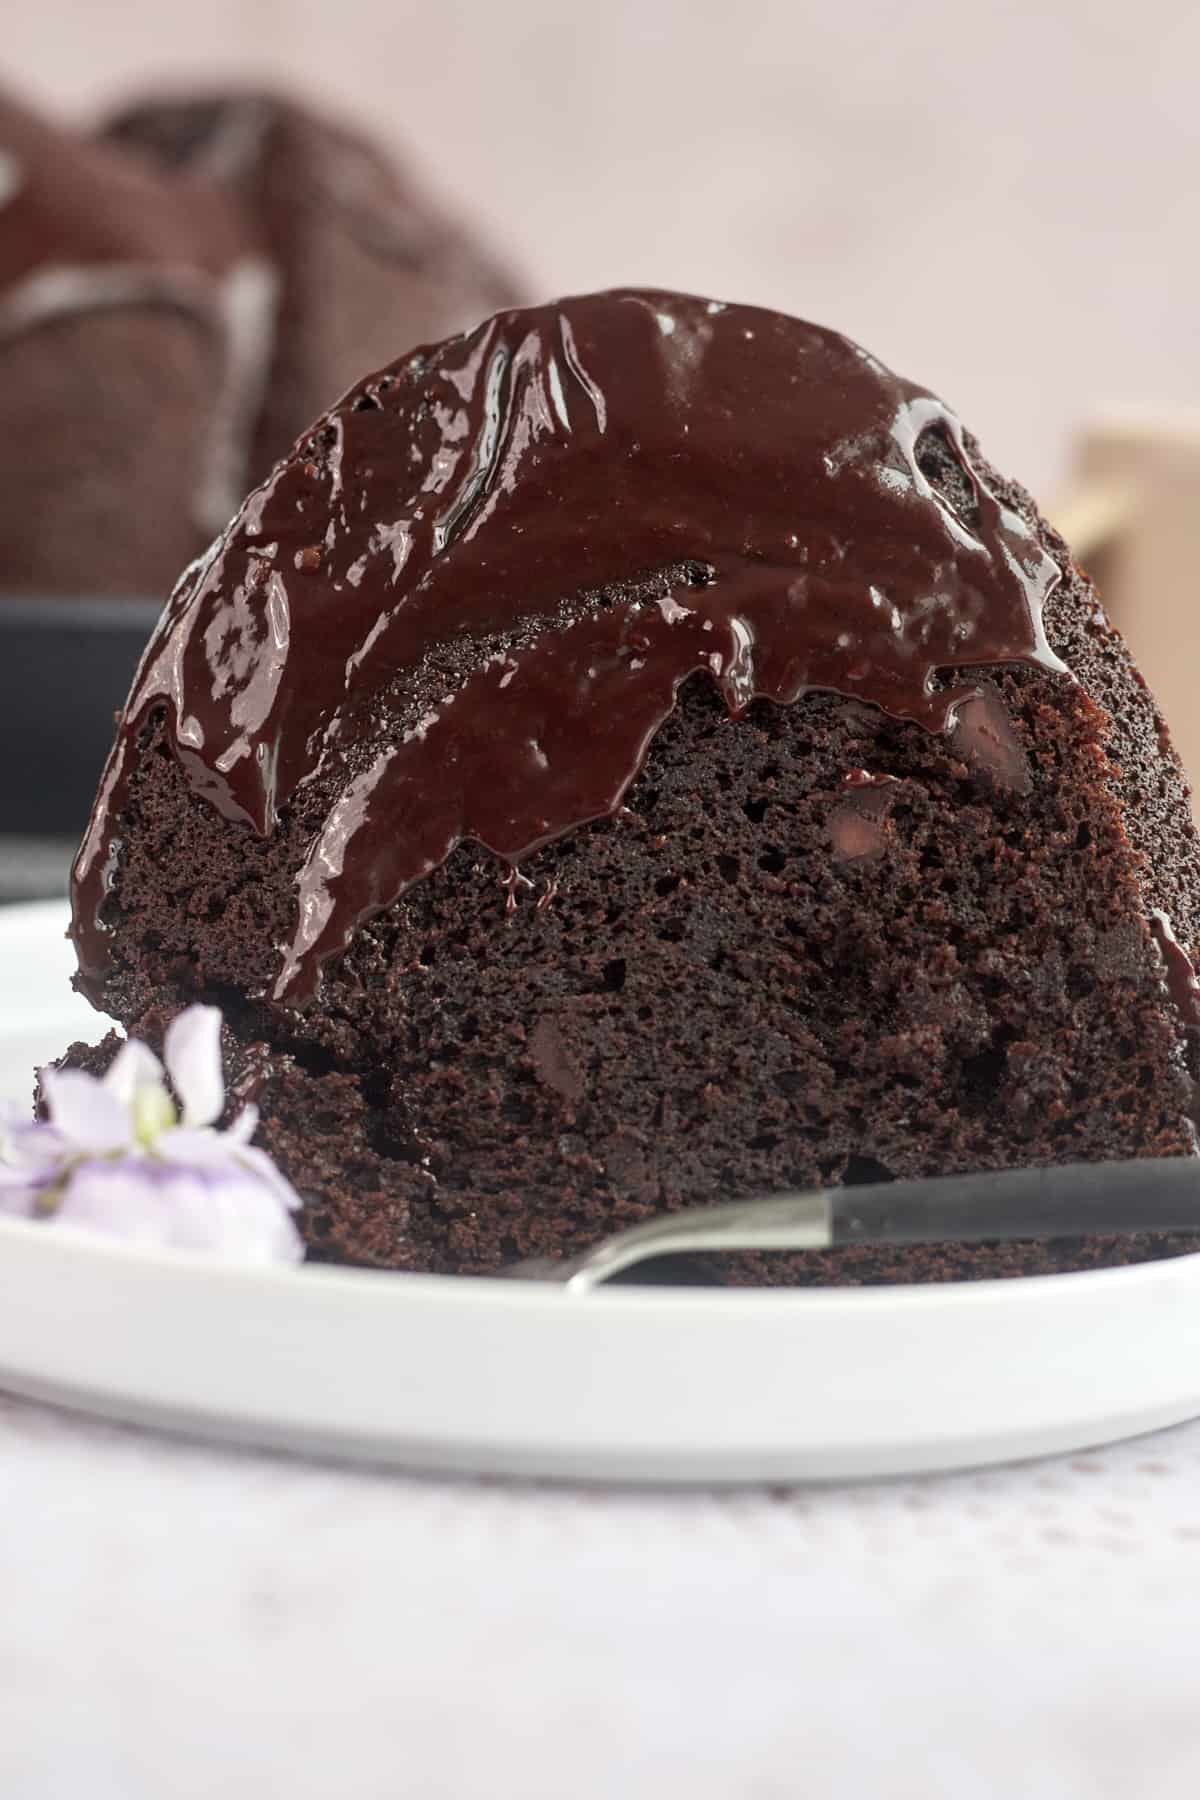 side image of bundt cake with chocolate chips, chocolate batter, and chocolate topping